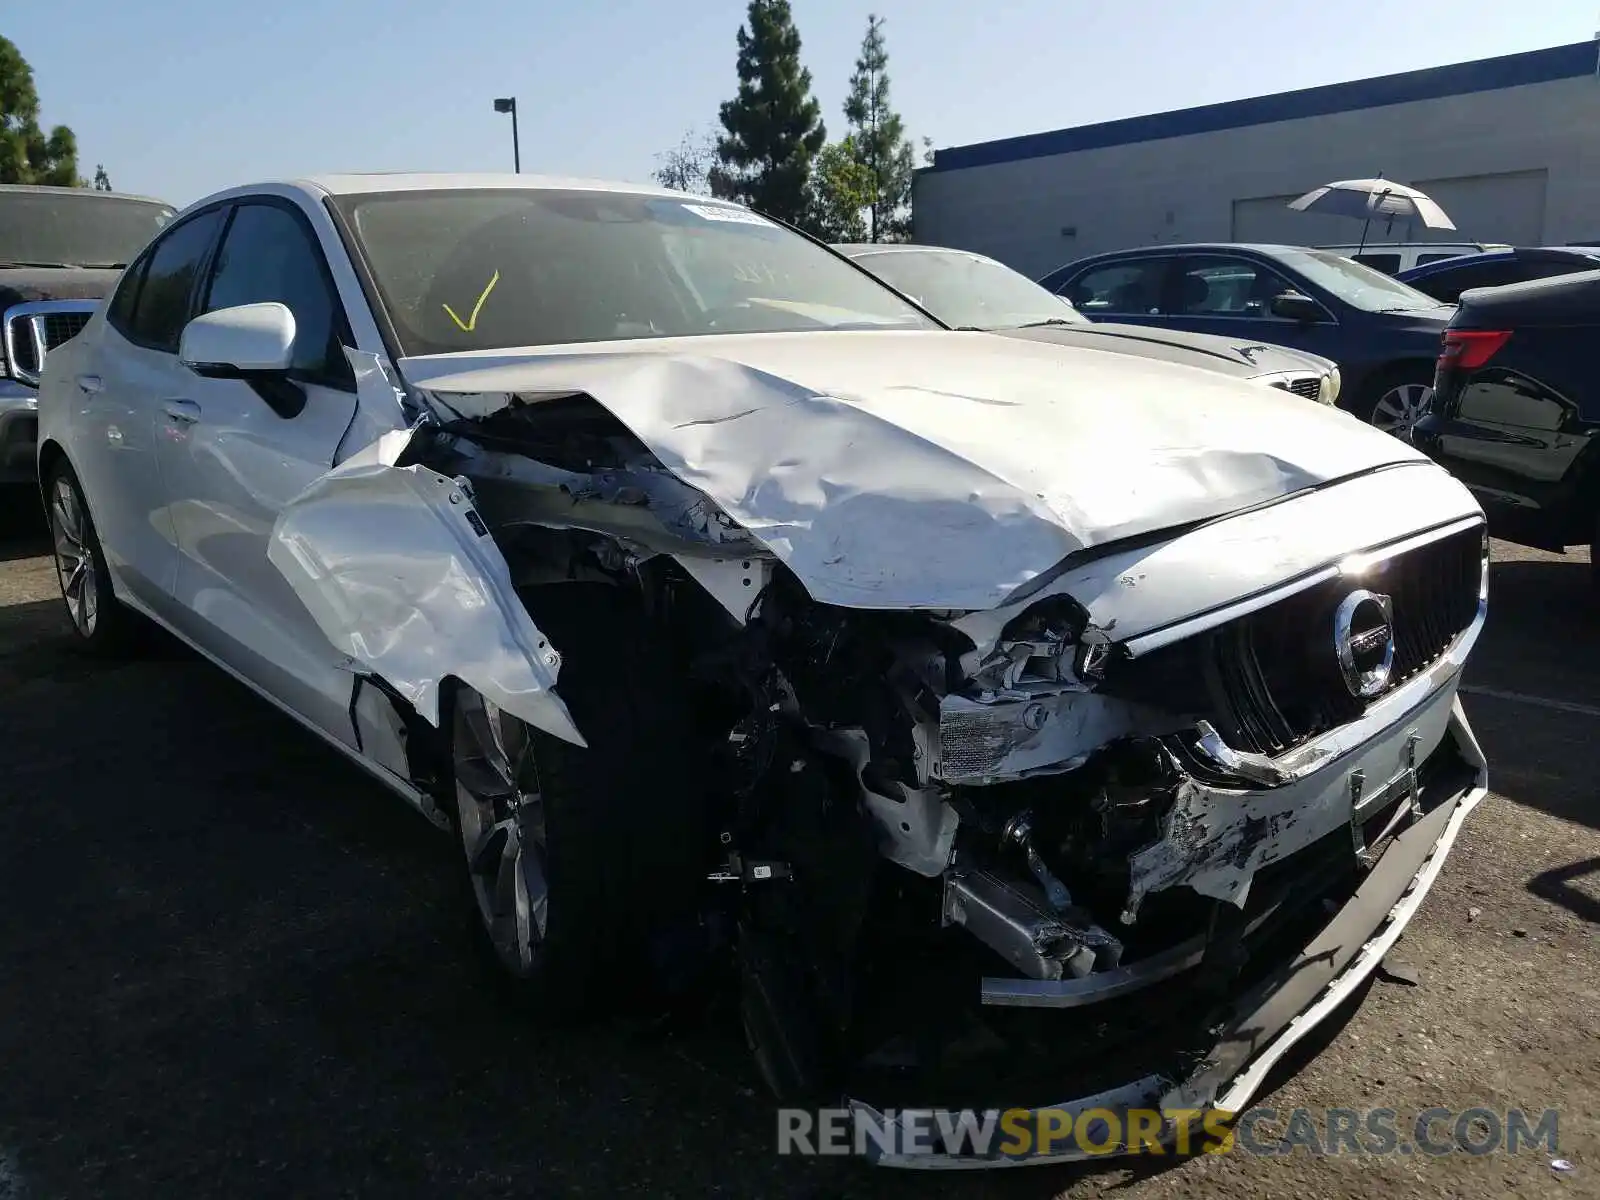 1 Photograph of a damaged car 7JR102FKXLG039961 VOLVO S60 T5 MOM 2020